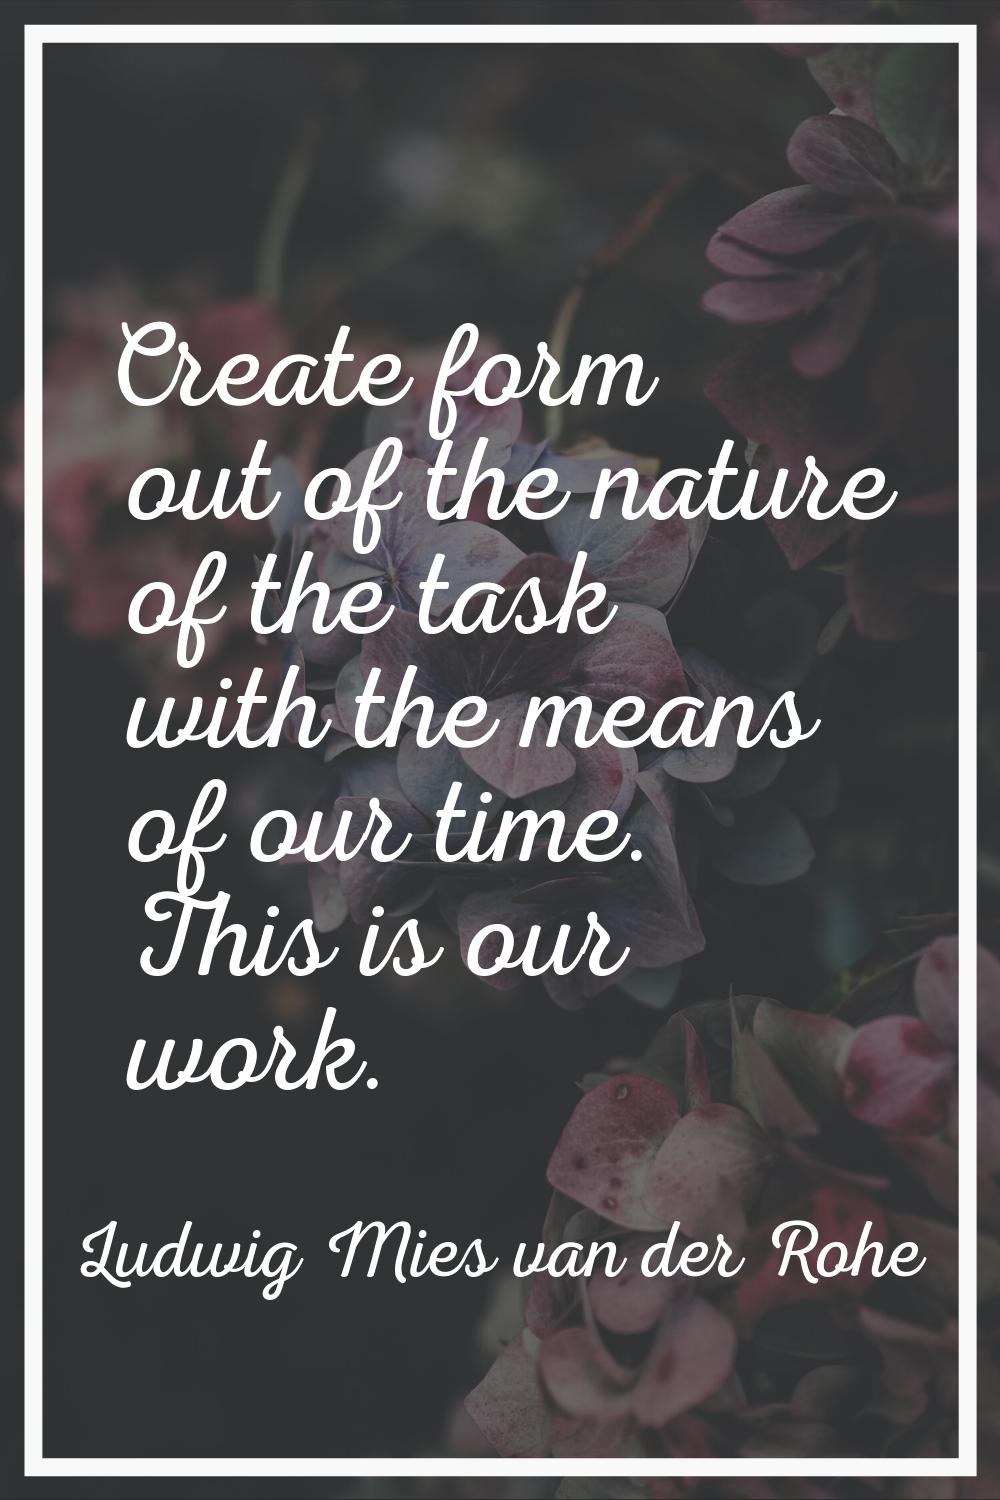 Create form out of the nature of the task with the means of our time. This is our work.